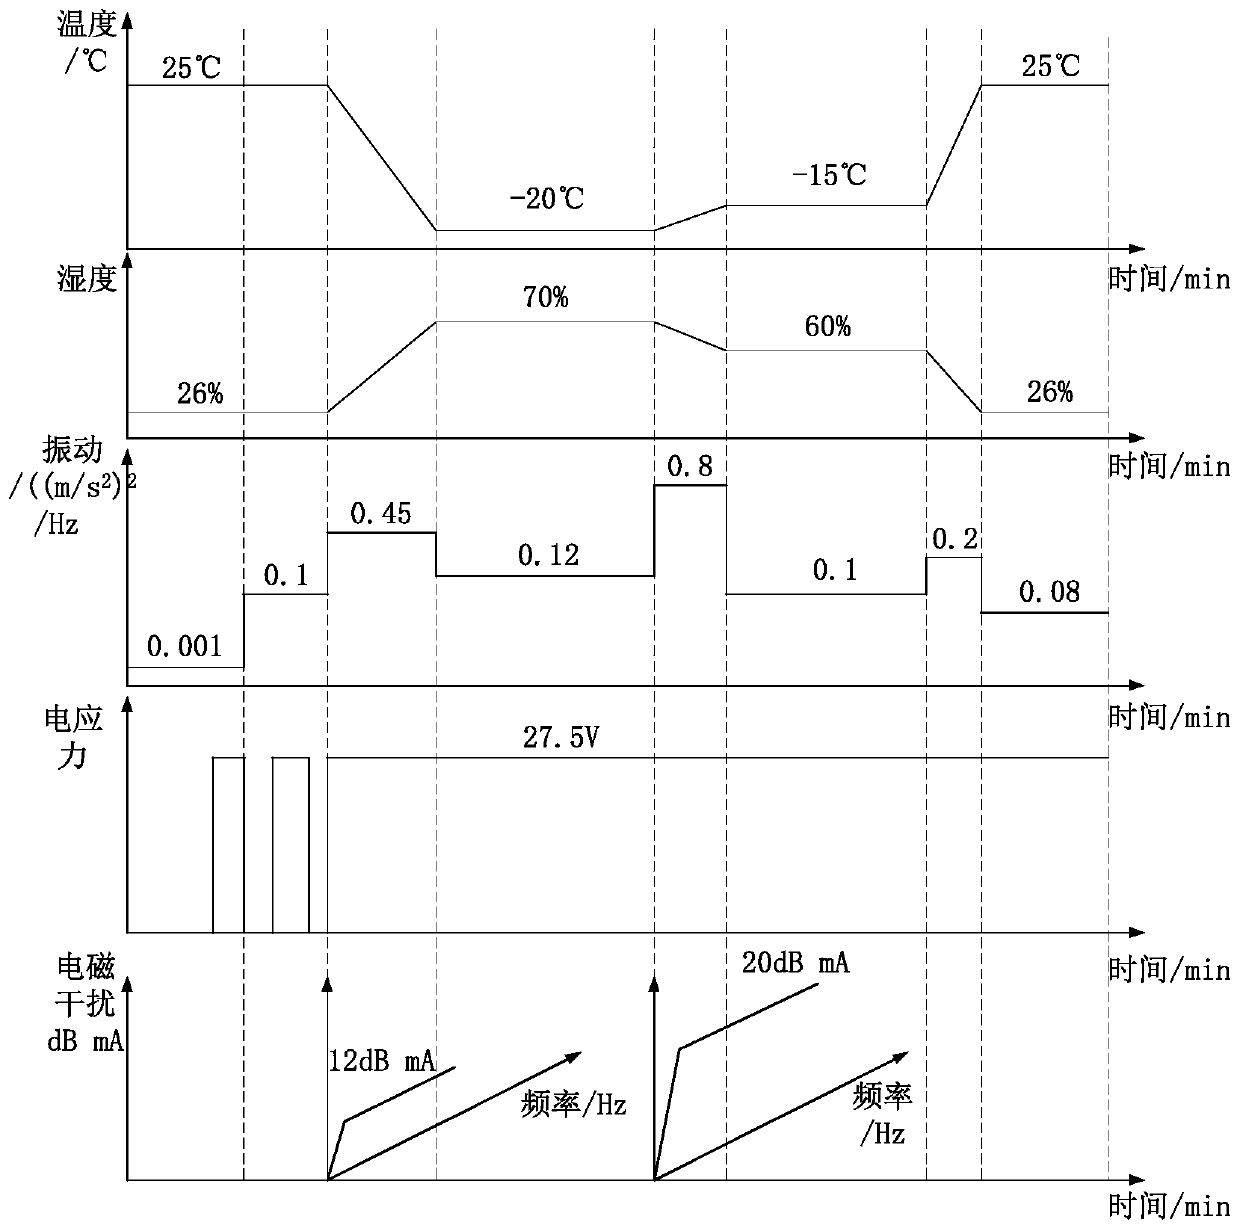 Joint reliability test section construction method for software and hardware hybrid system